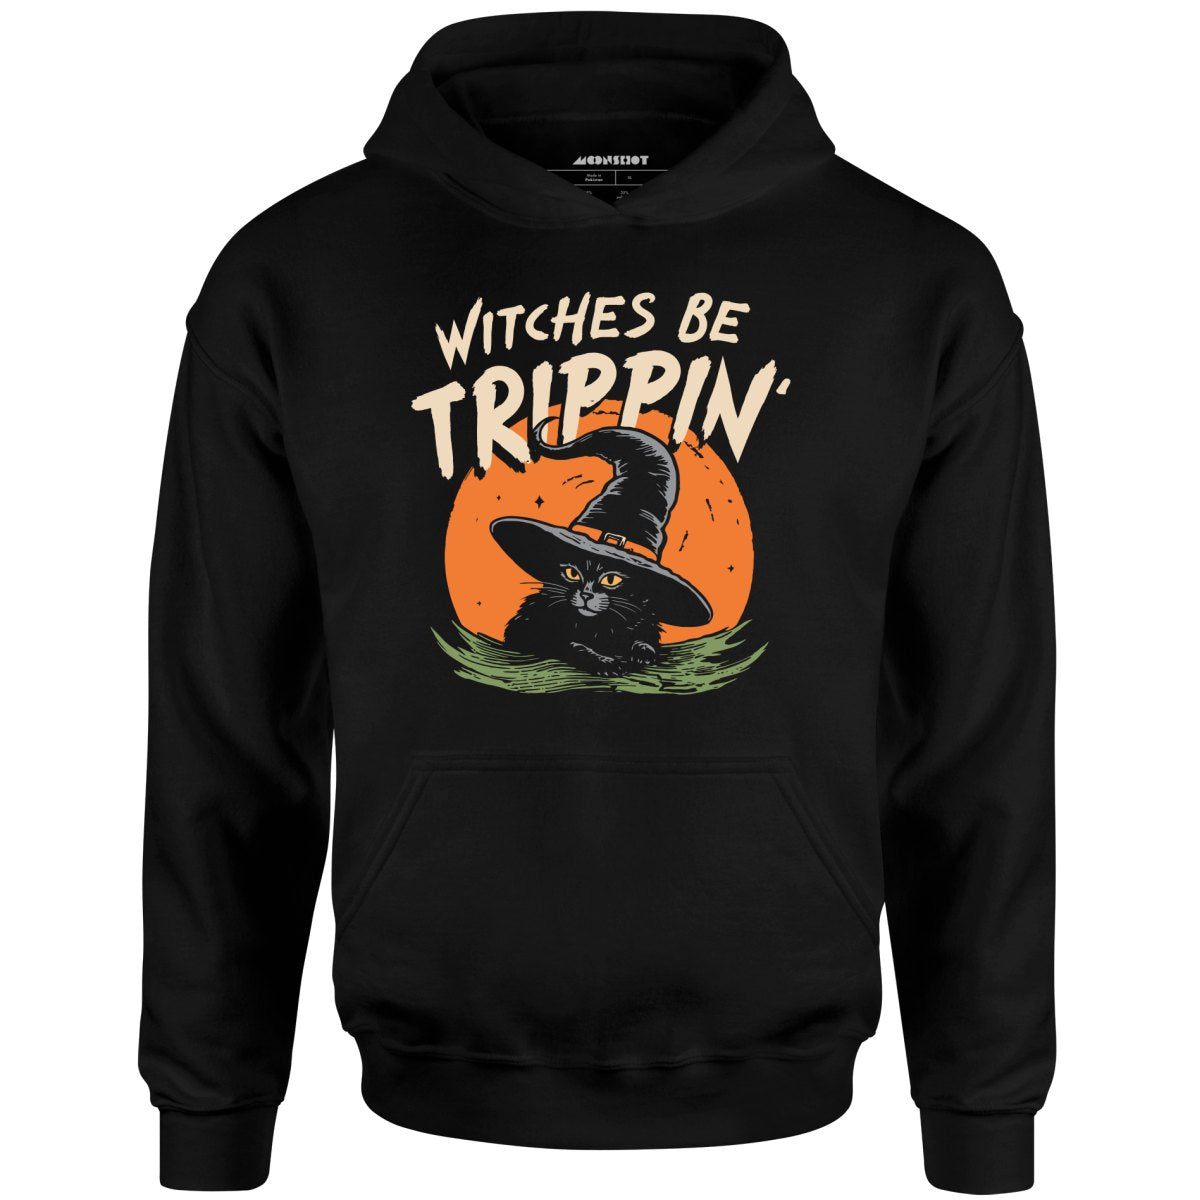 Witches Be Trippin' - Unisex Hoodie